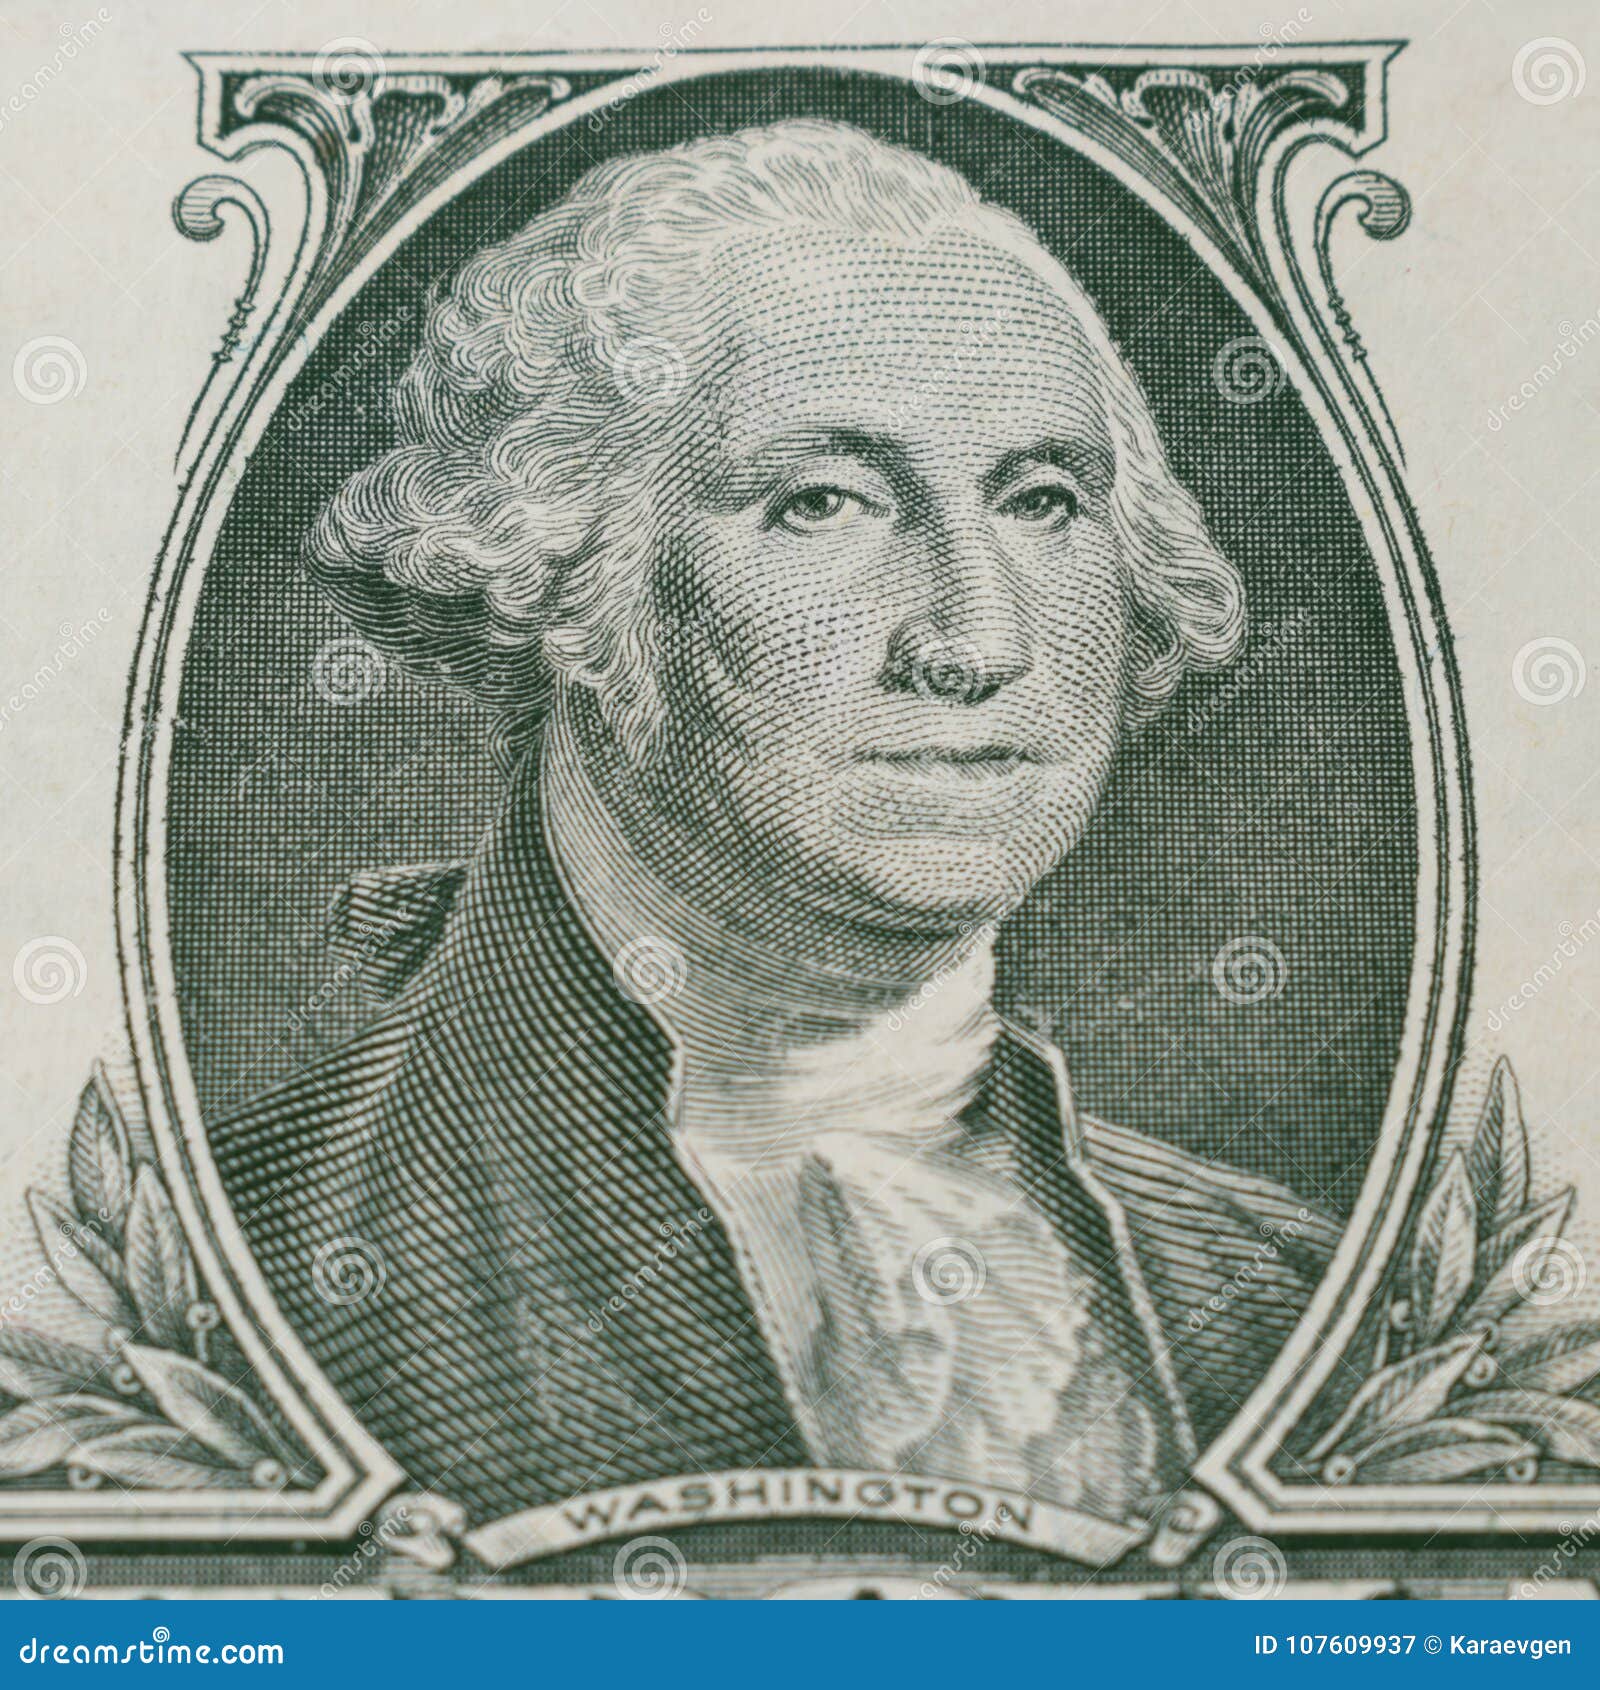 Albums 101+ Images whose face is on the $1 bill Full HD, 2k, 4k